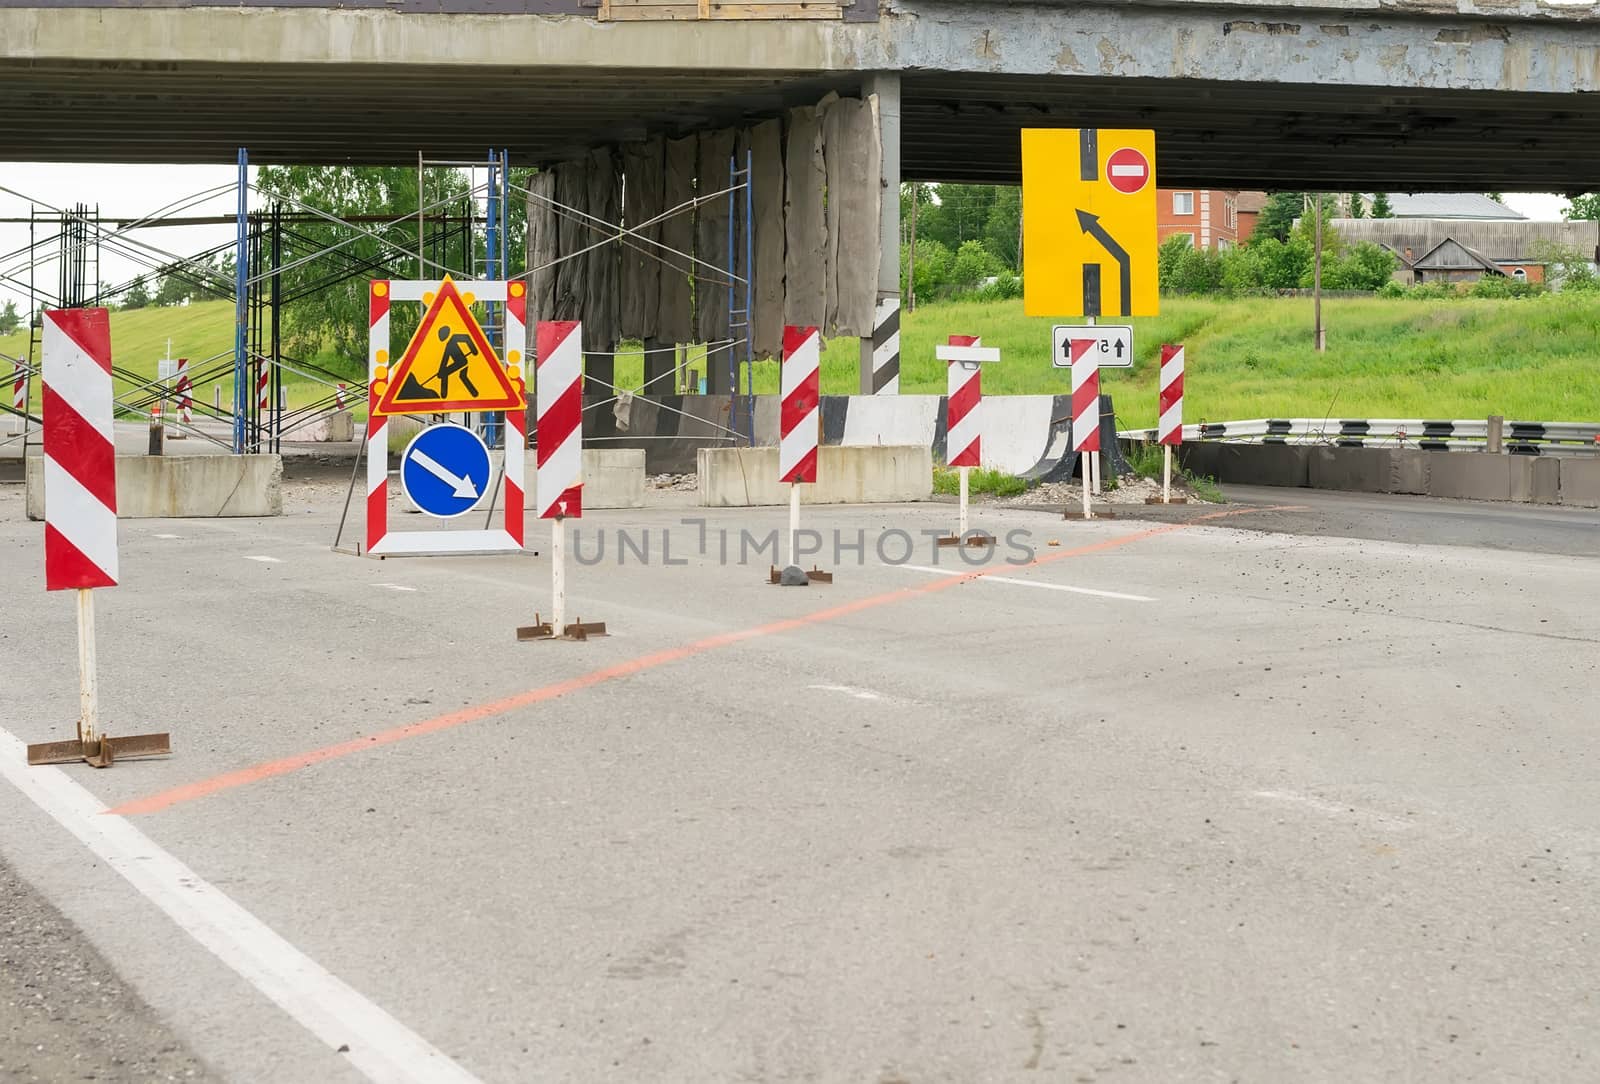 Road signs, detour, repair of the road on the asphalt bypass road near the residential area